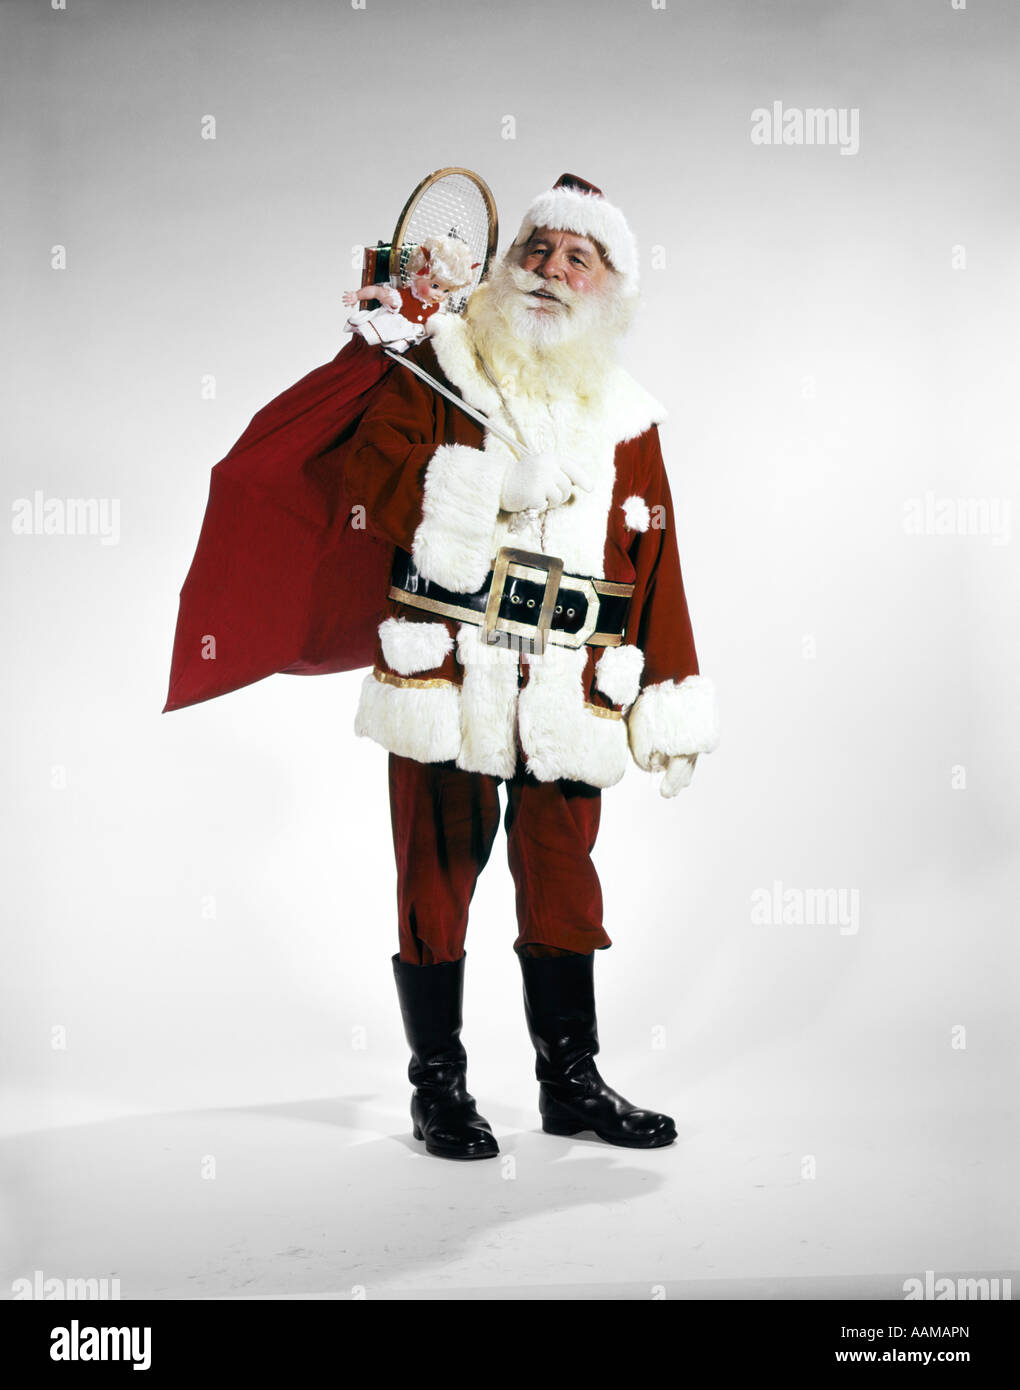 1960s FULL LENGTH PORTRAIT OF SANTA CLAUS WITH STUFFED TOY SACK ON HIS BACK STUDIO Stock Photo